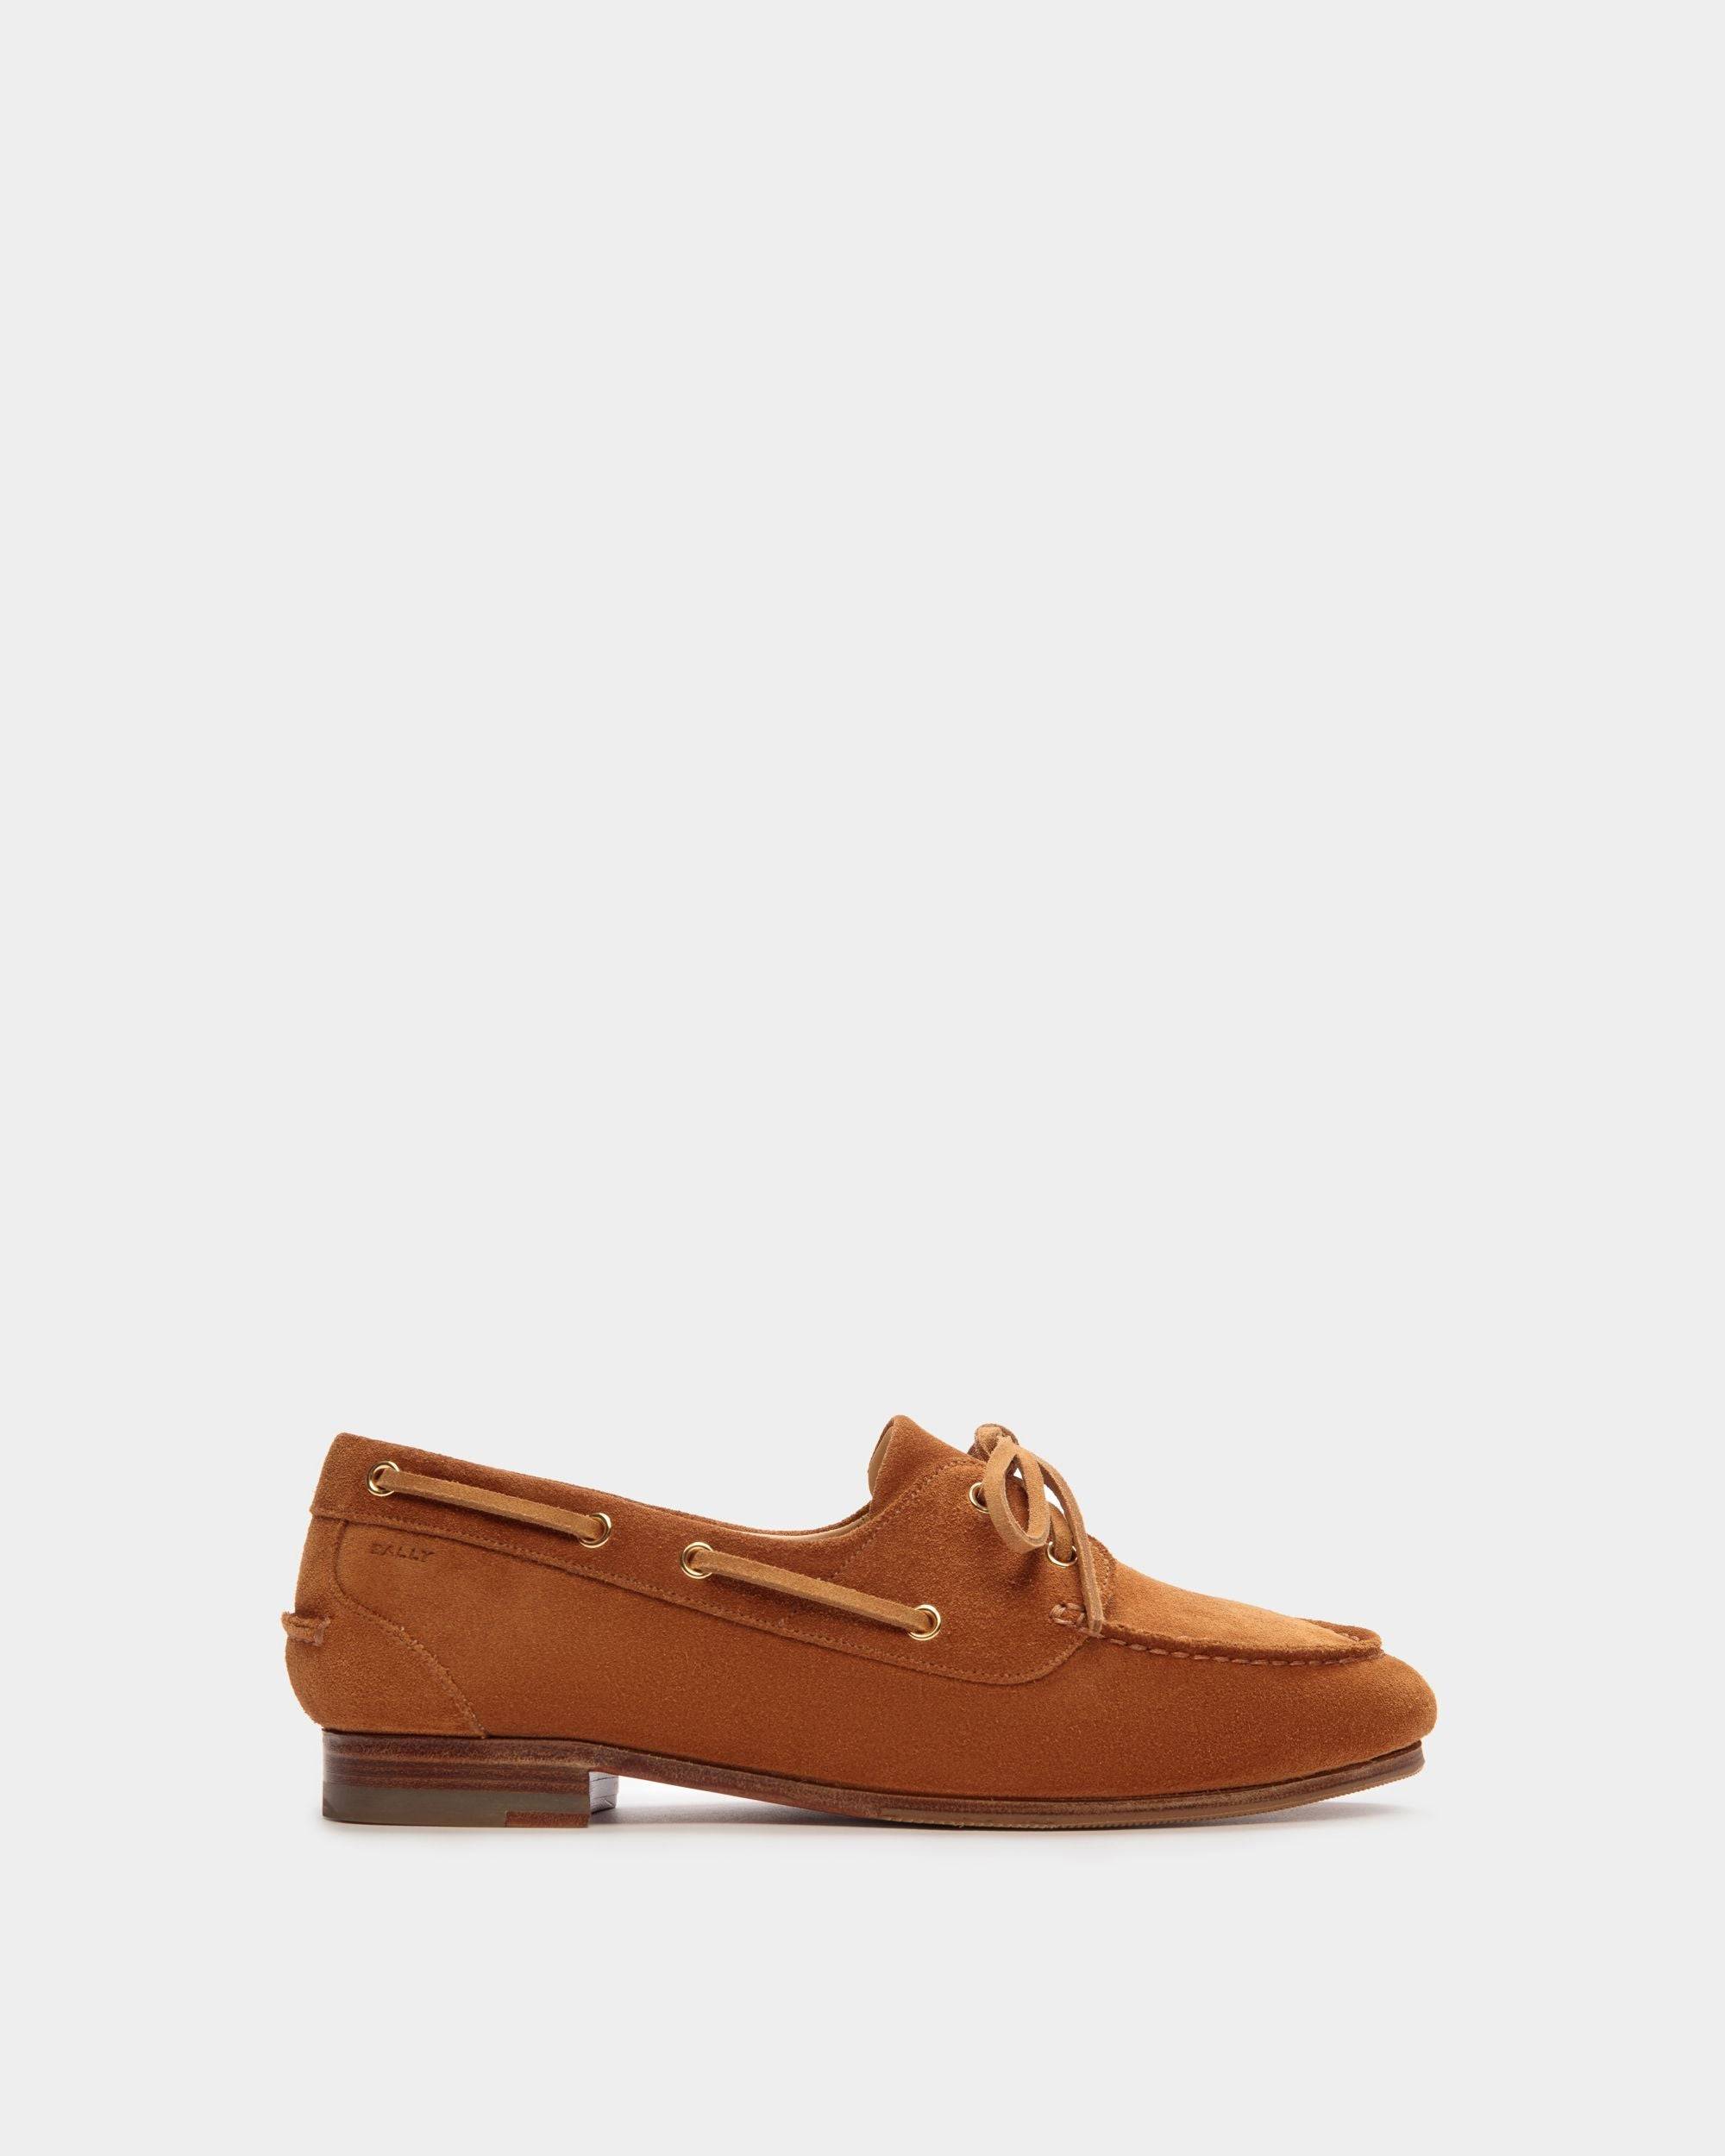 Women's Plume Moccasin in Brown Suede | Bally | Still Life Side